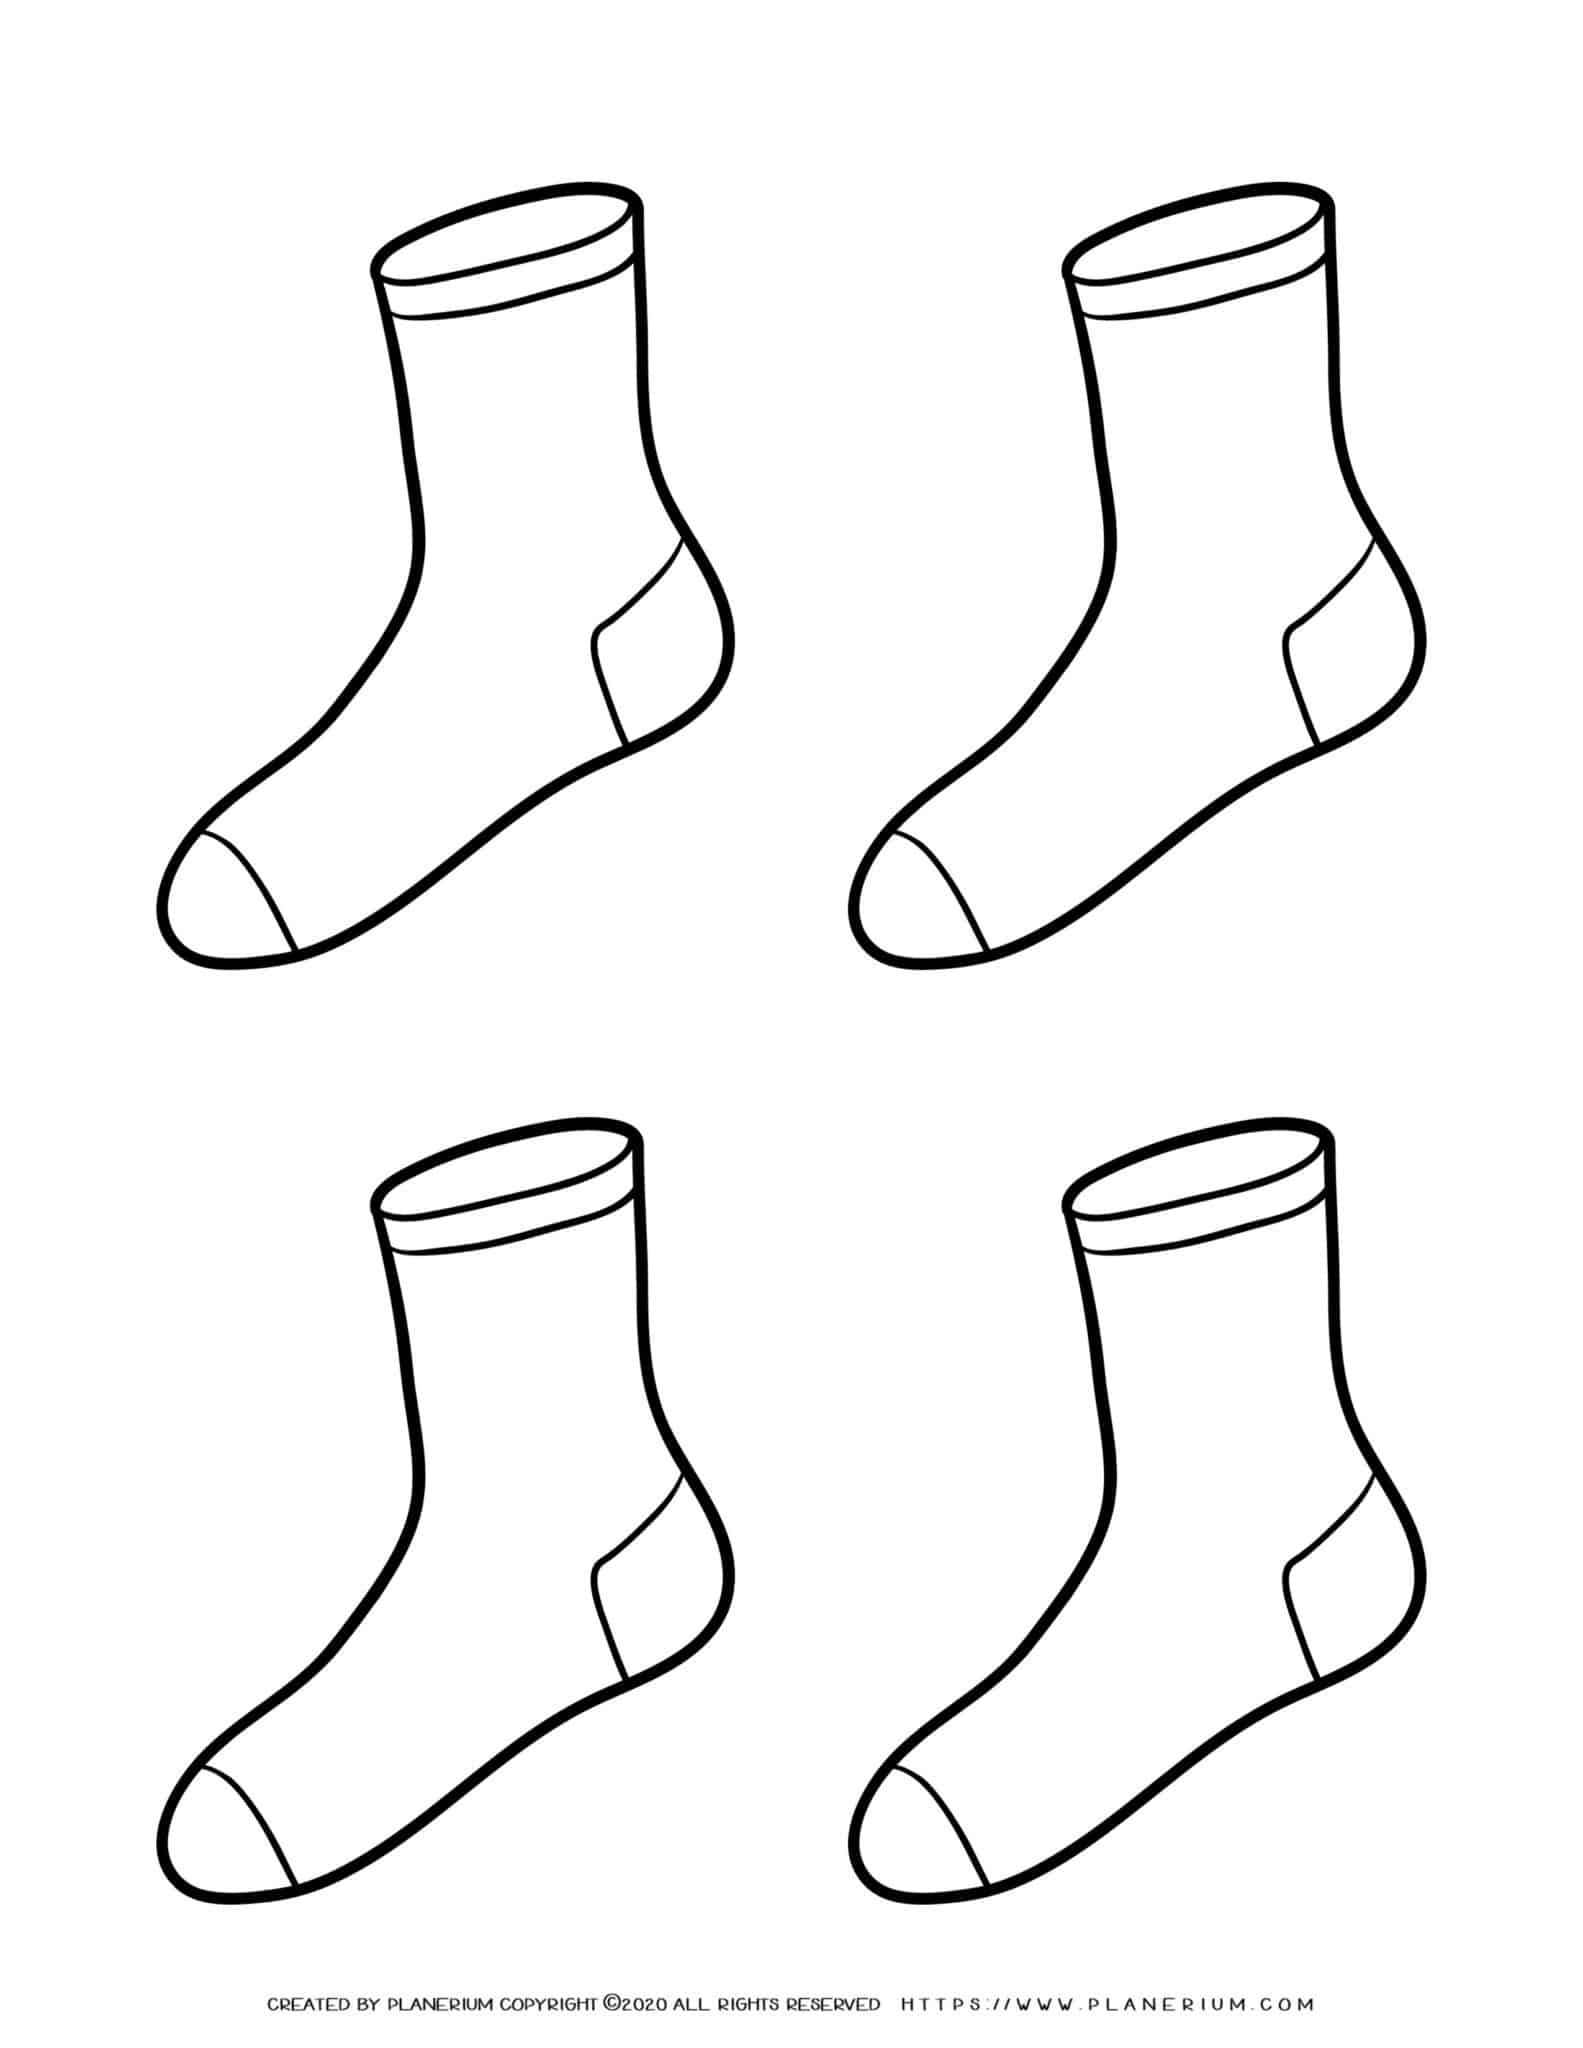 Clothes coloring page